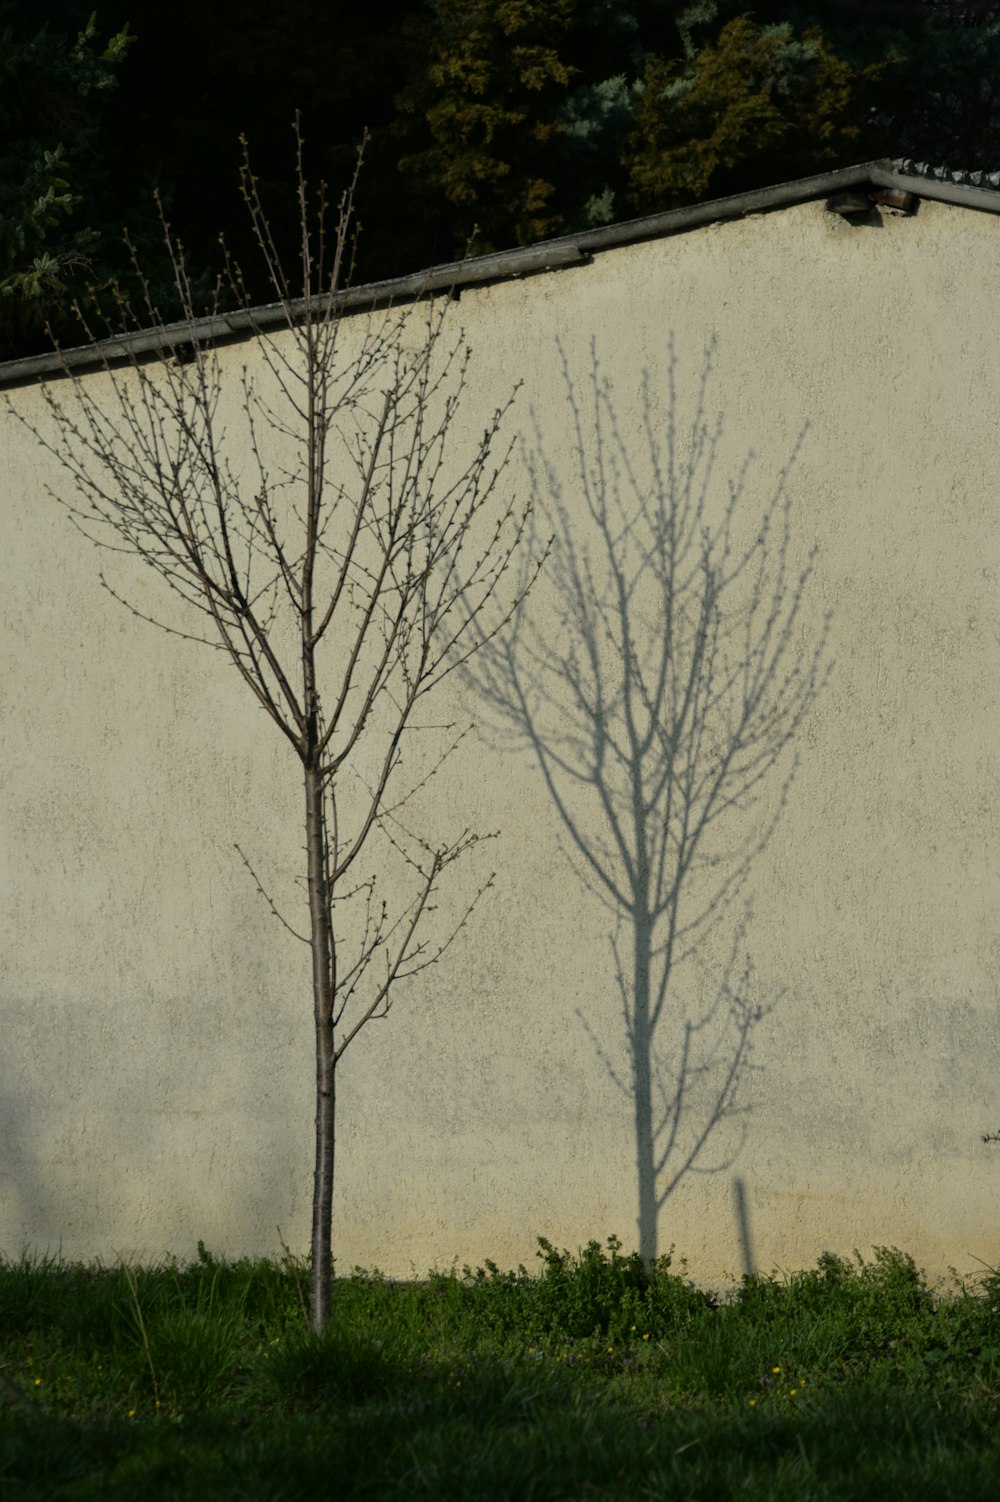 a tree casting a shadow on a wall